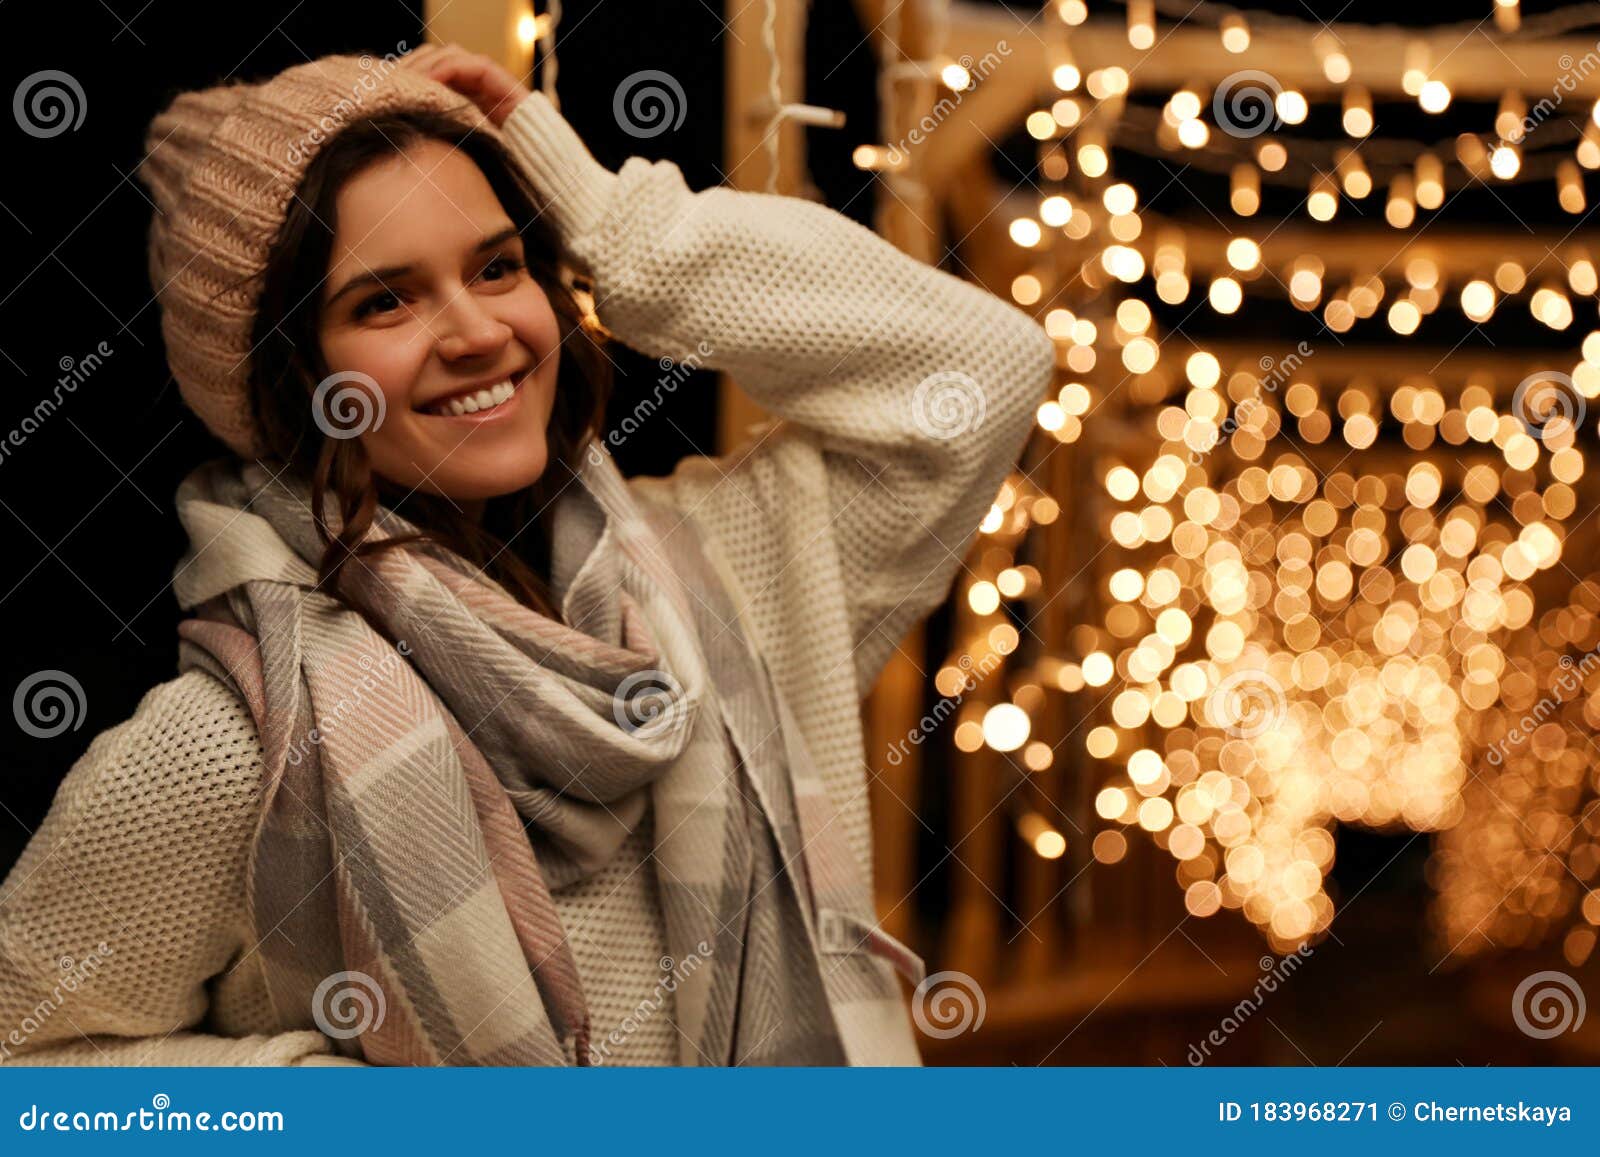 Woman Wearing Warm Sweater, Hat and Scarf Outdoors at Night. Winter ...